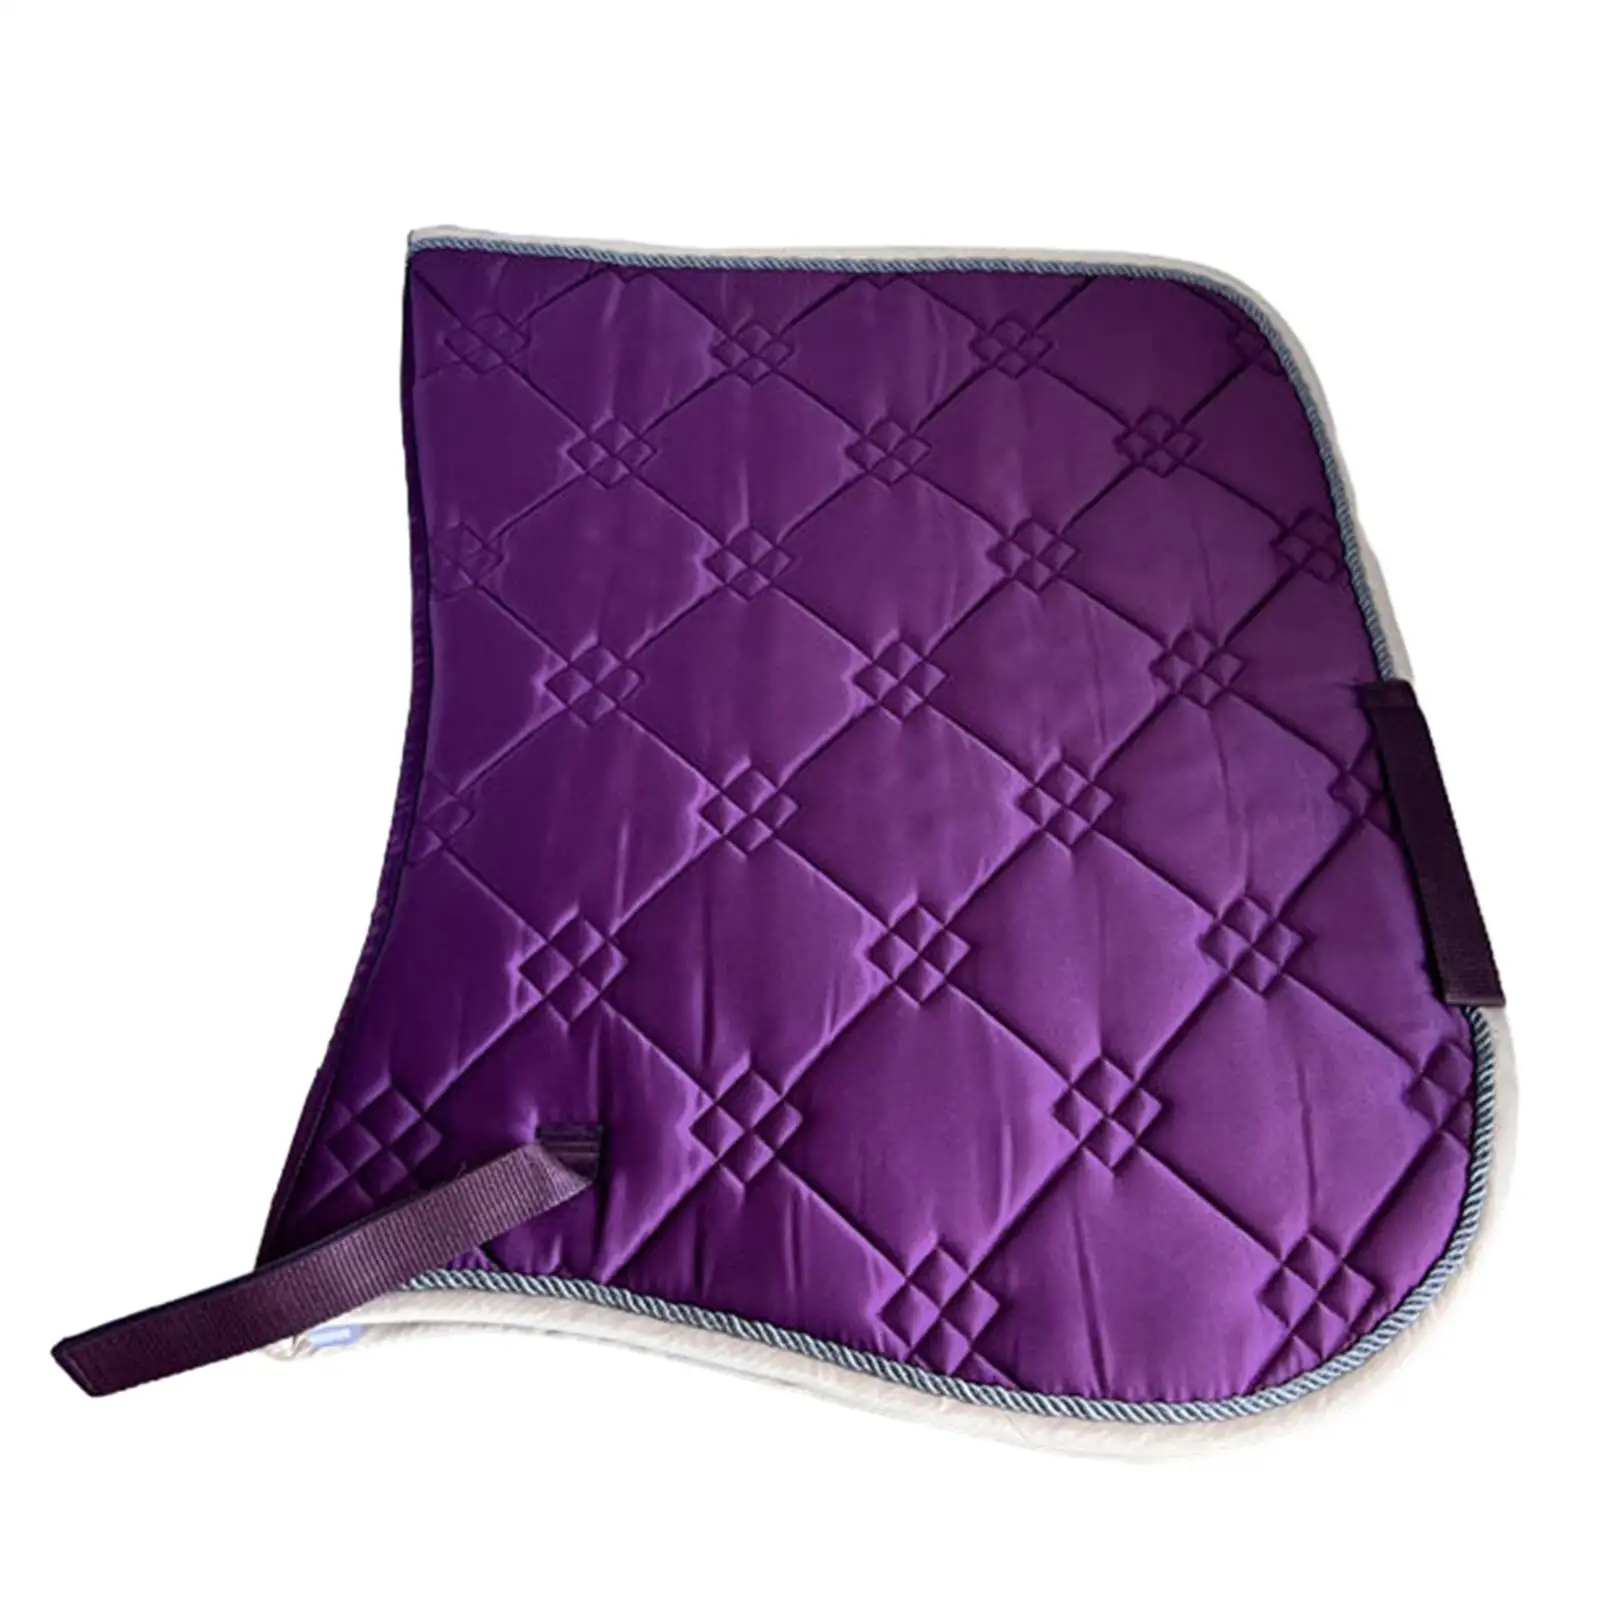 Saddle Pad for Horse Equestrian Riding Equipment Sports Riding Soft Nonslip